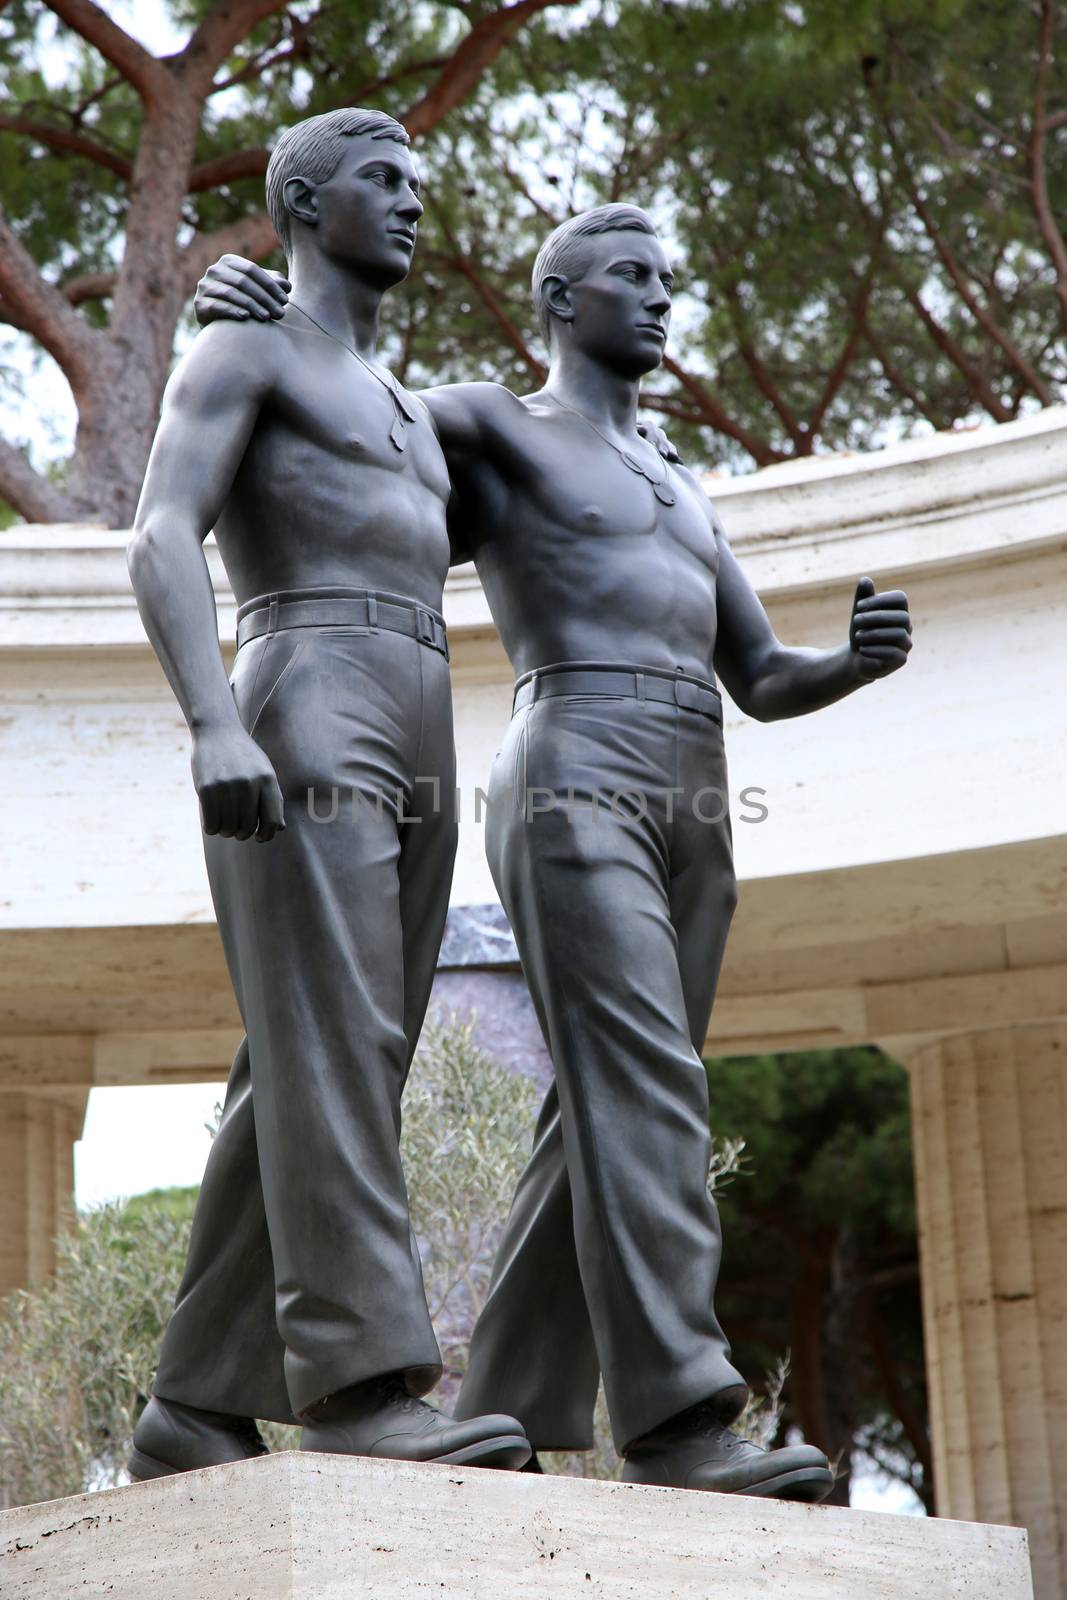 NETTUNO - April 06: Bronze statue of two brothers in arms of the American Military Cemetery of Nettuno in Italy, April 06, 2015 in Nettuno, Italy.